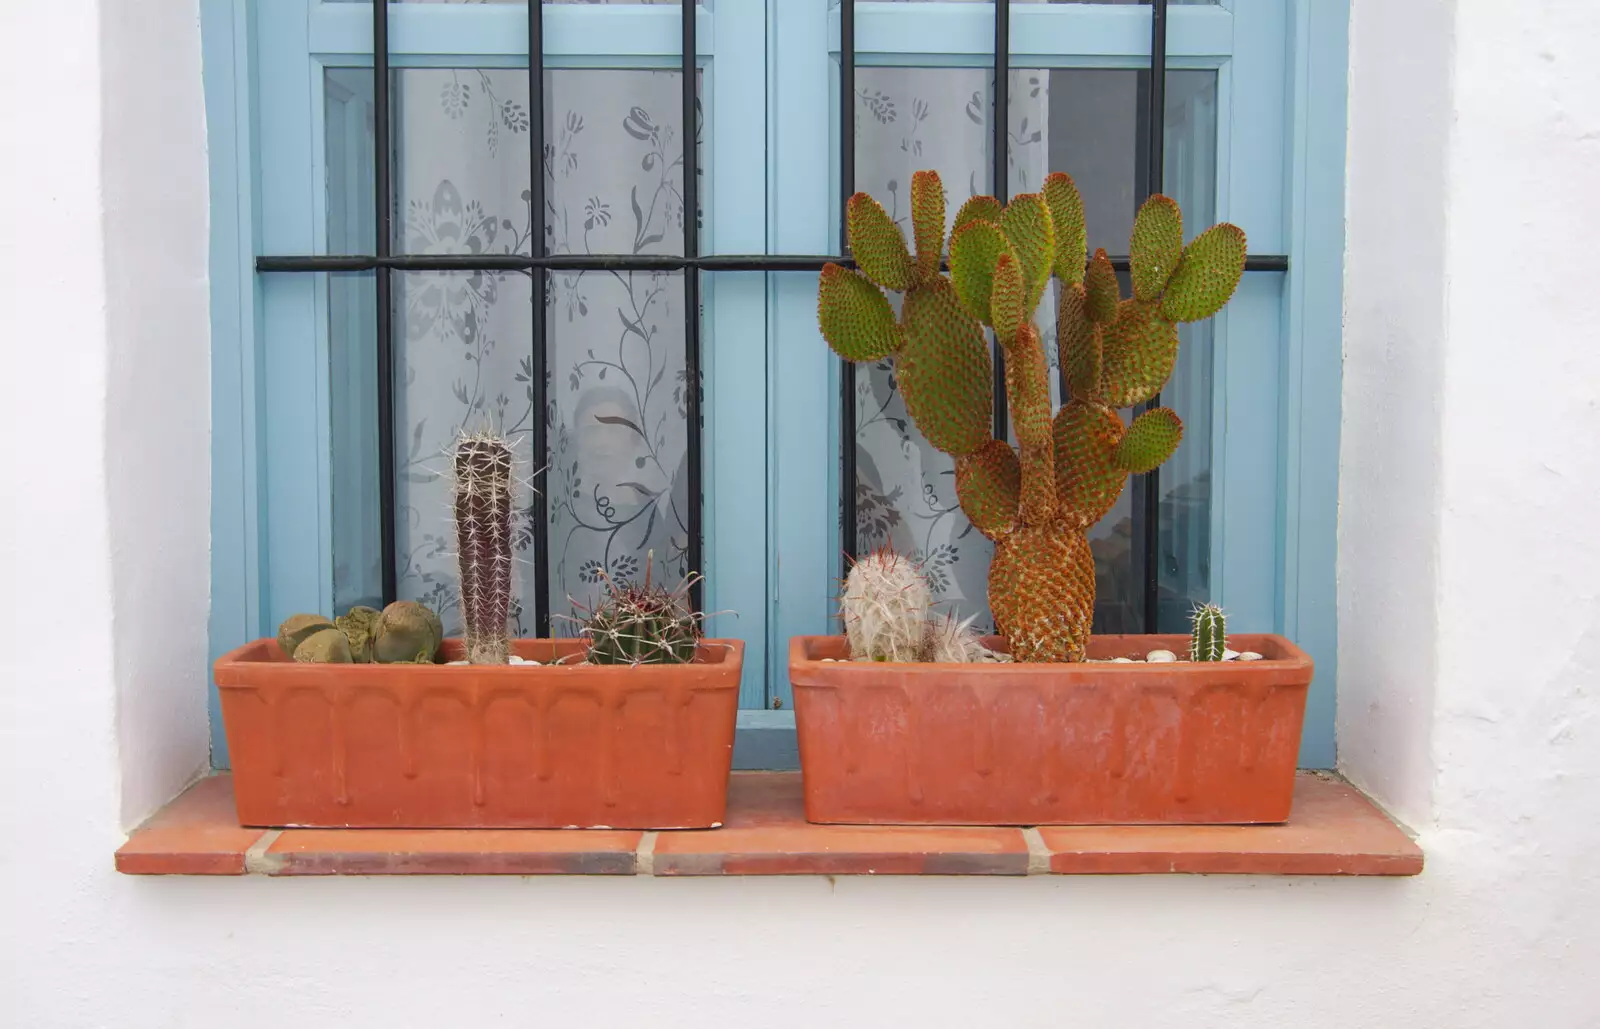 Amusing cacti on a windowsill, from The Caves of Nerja, and Frigiliana, Andalusia, Spain - 18th April 2019